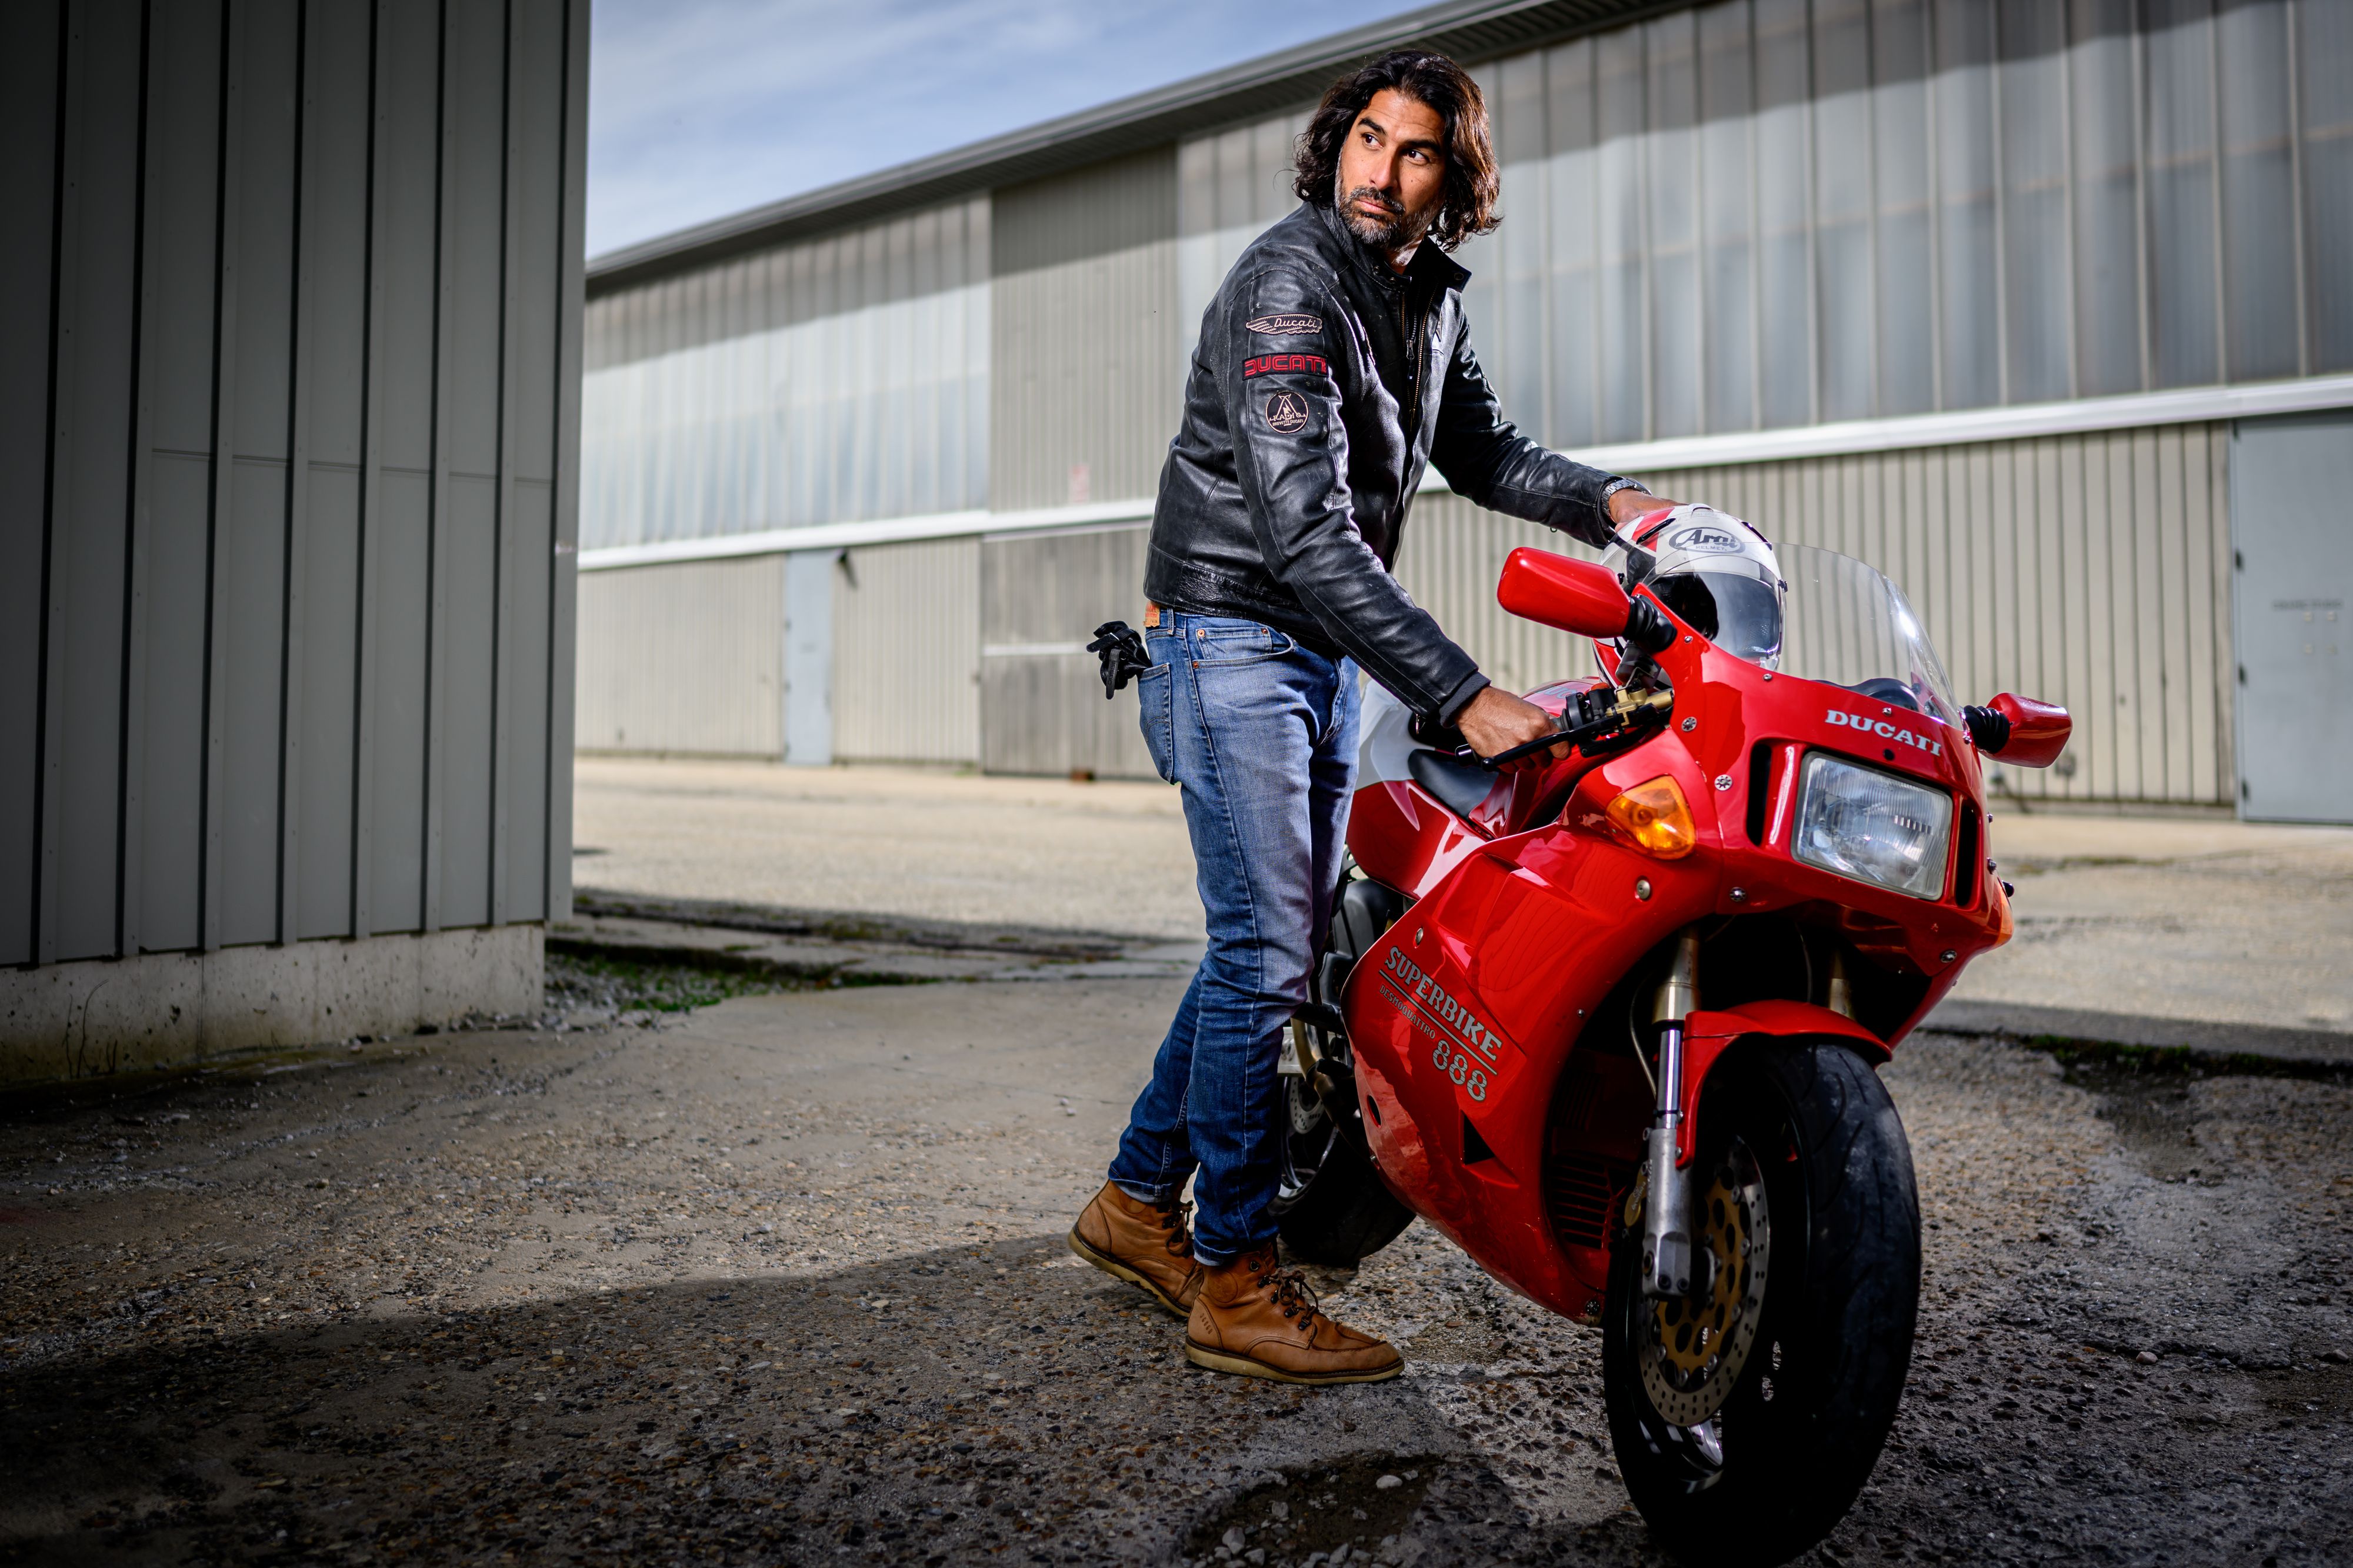 Man with red Ducati motorcycle